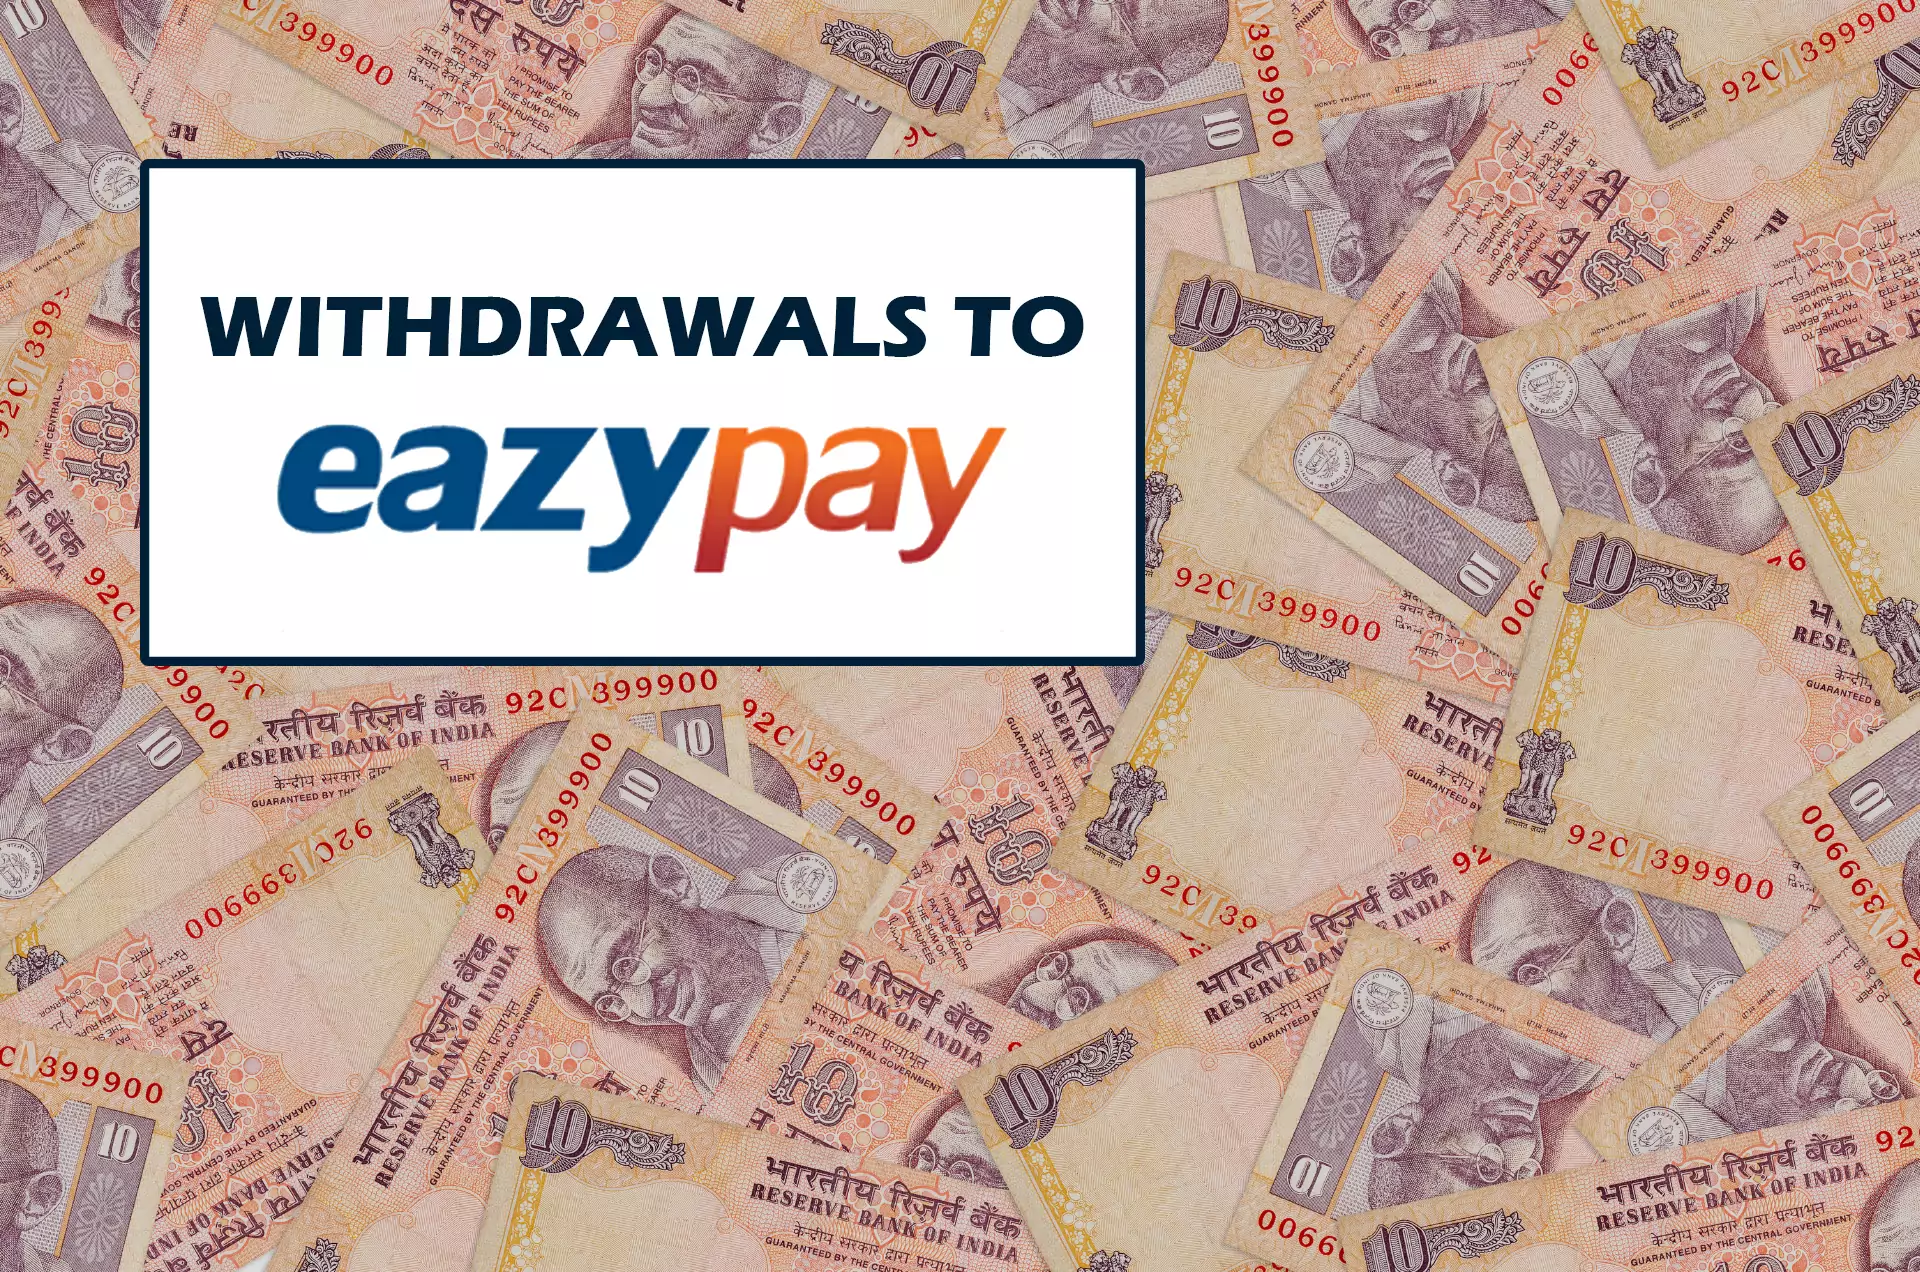 Withdraw money to your Eazypay account quickly and easily.